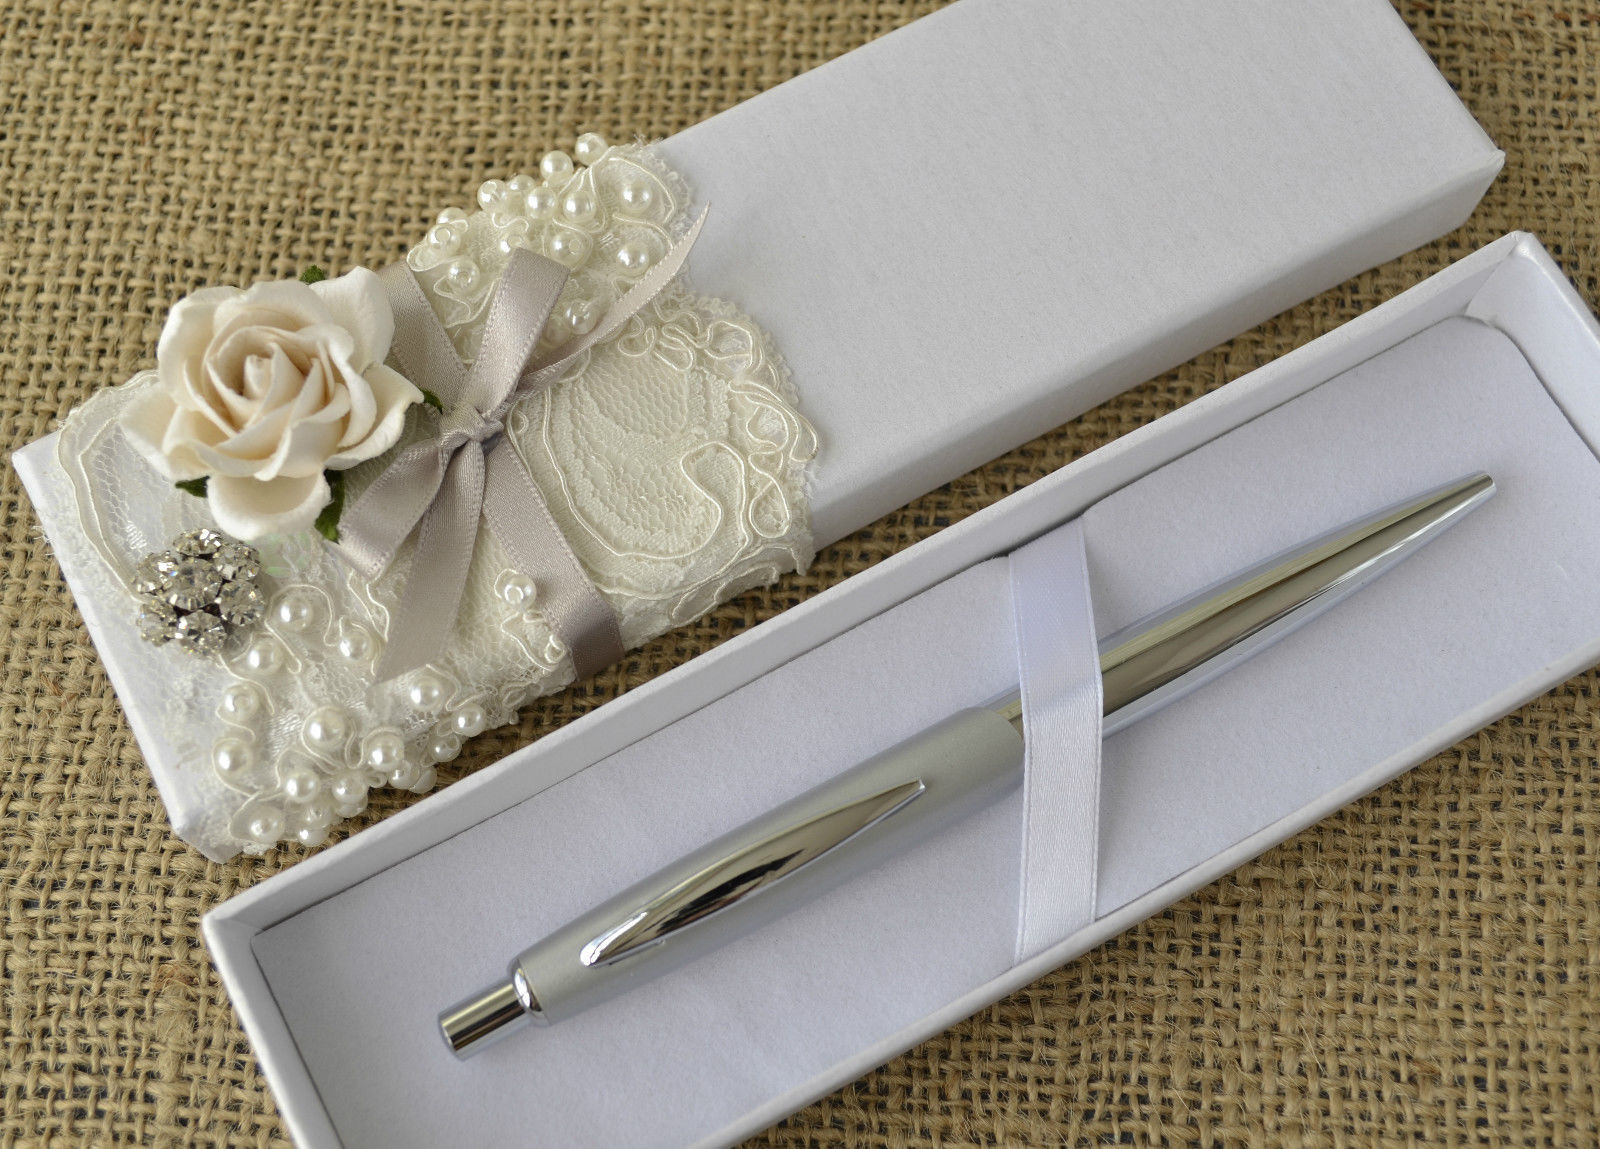 Wedding Guest Book With Pen
 Wedding Guest Book Pen in Luxury Lace & Rose Hand